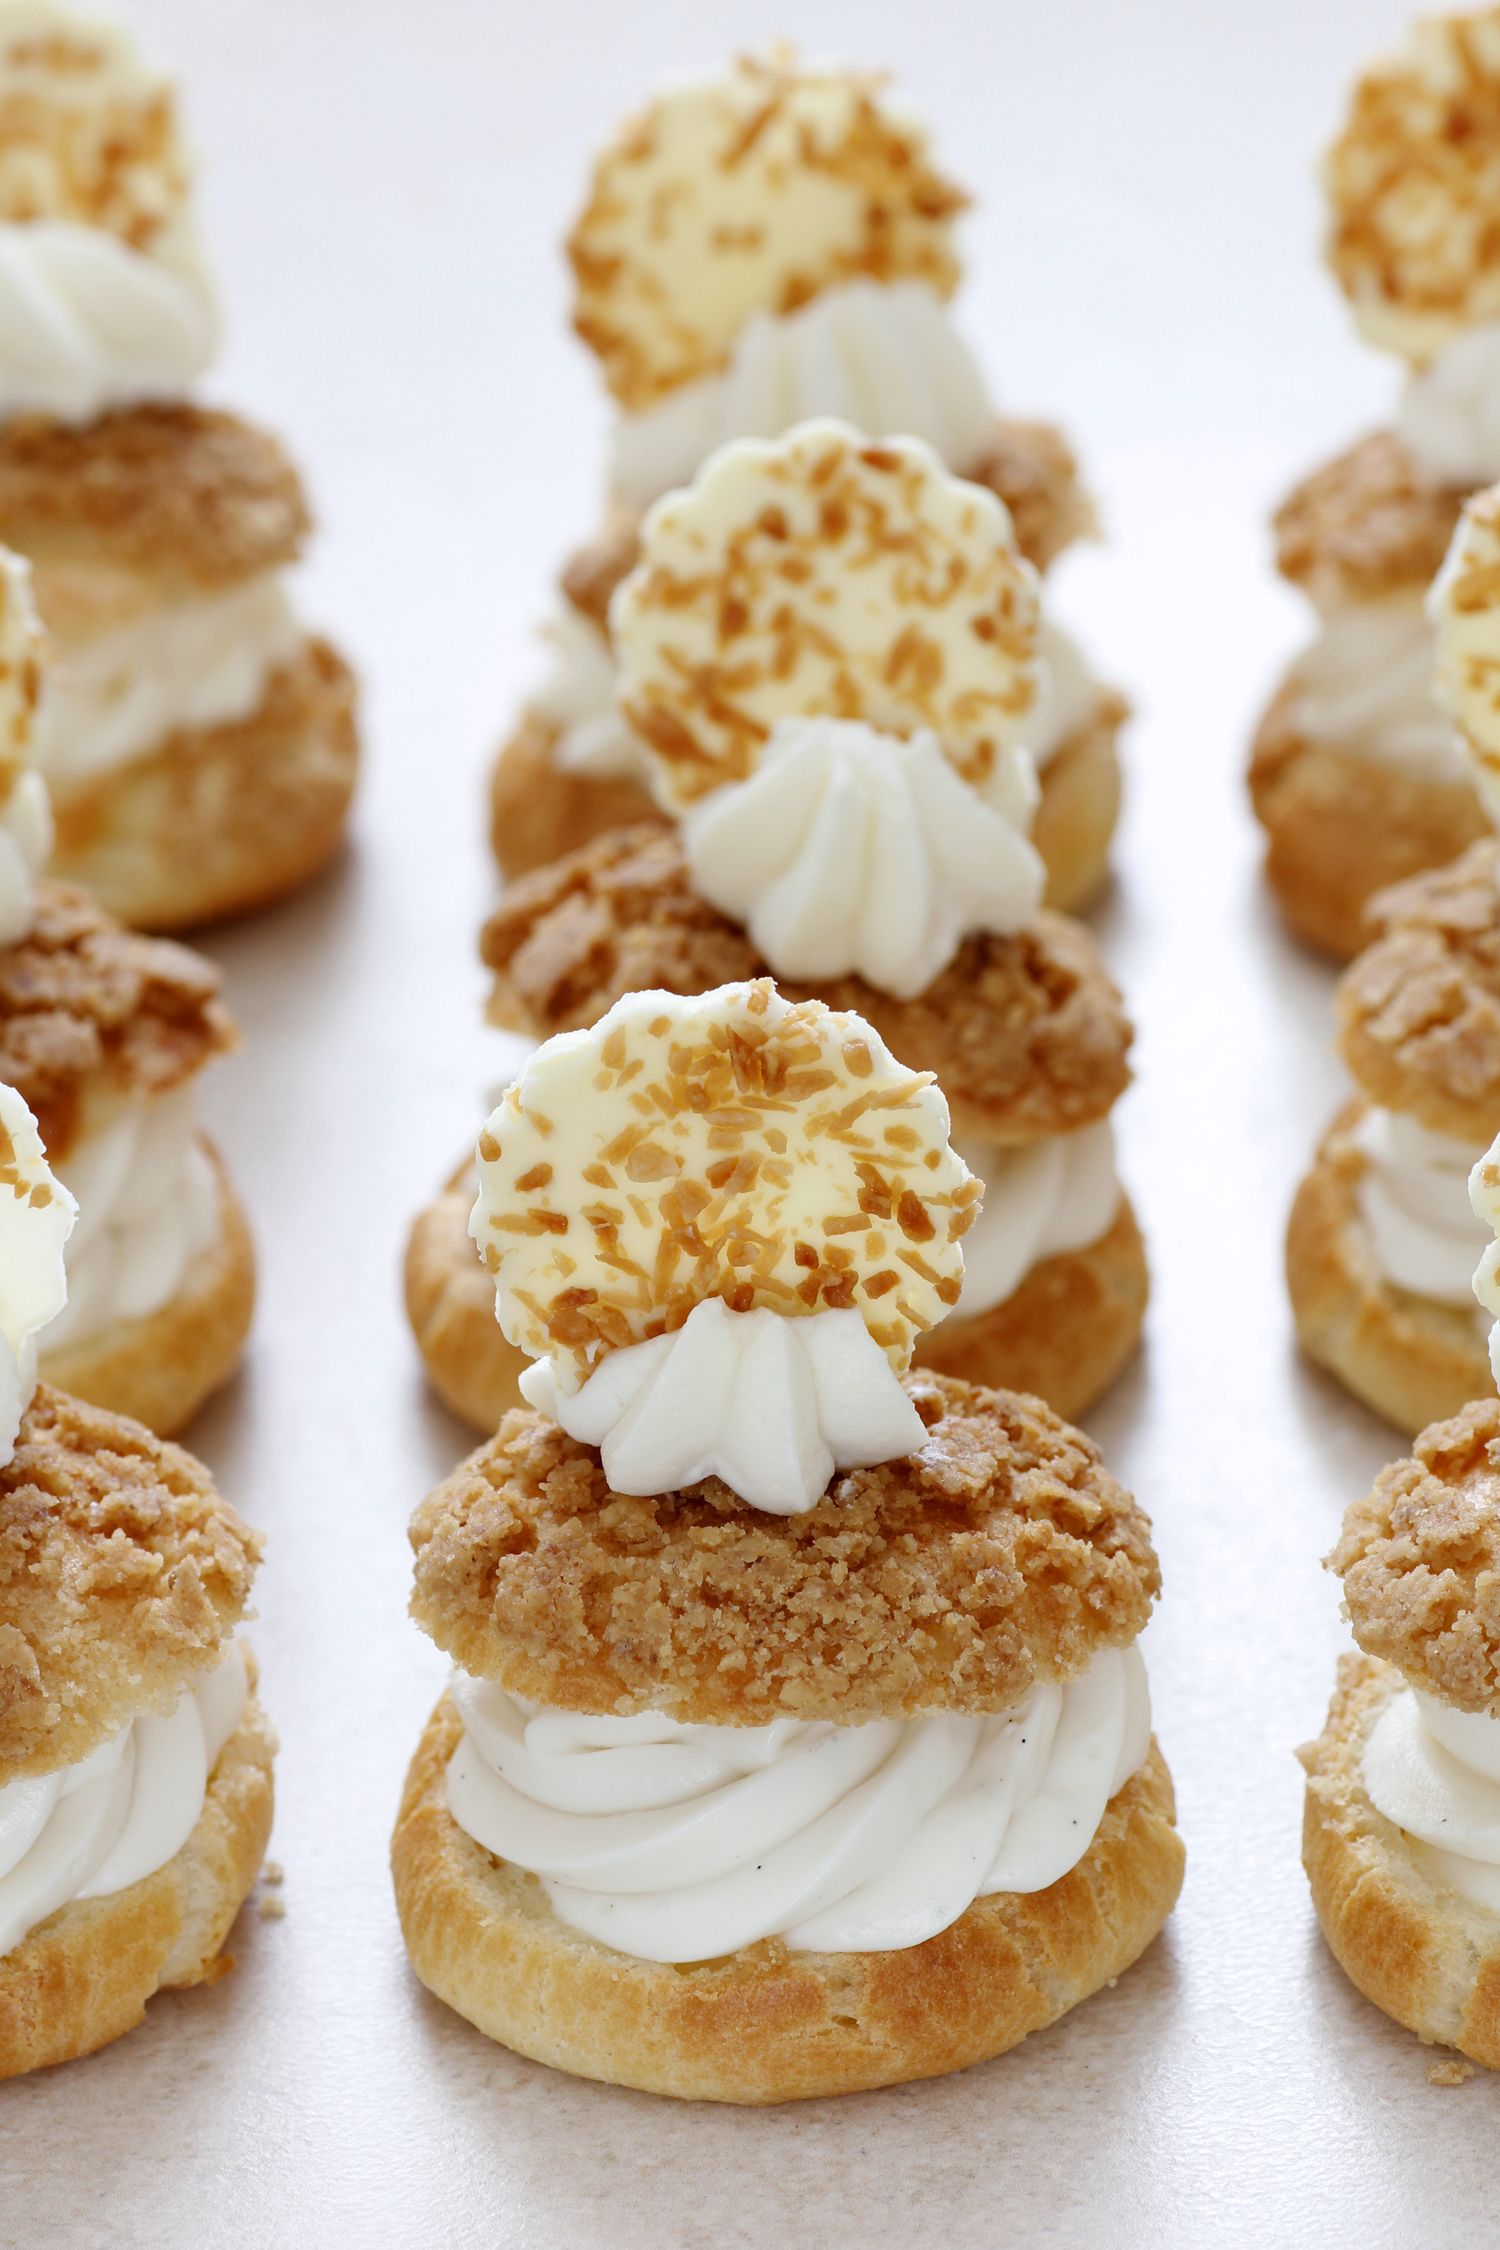 Cream Puffs filled with Honey White Chocolate Mousse and Almond Streusel